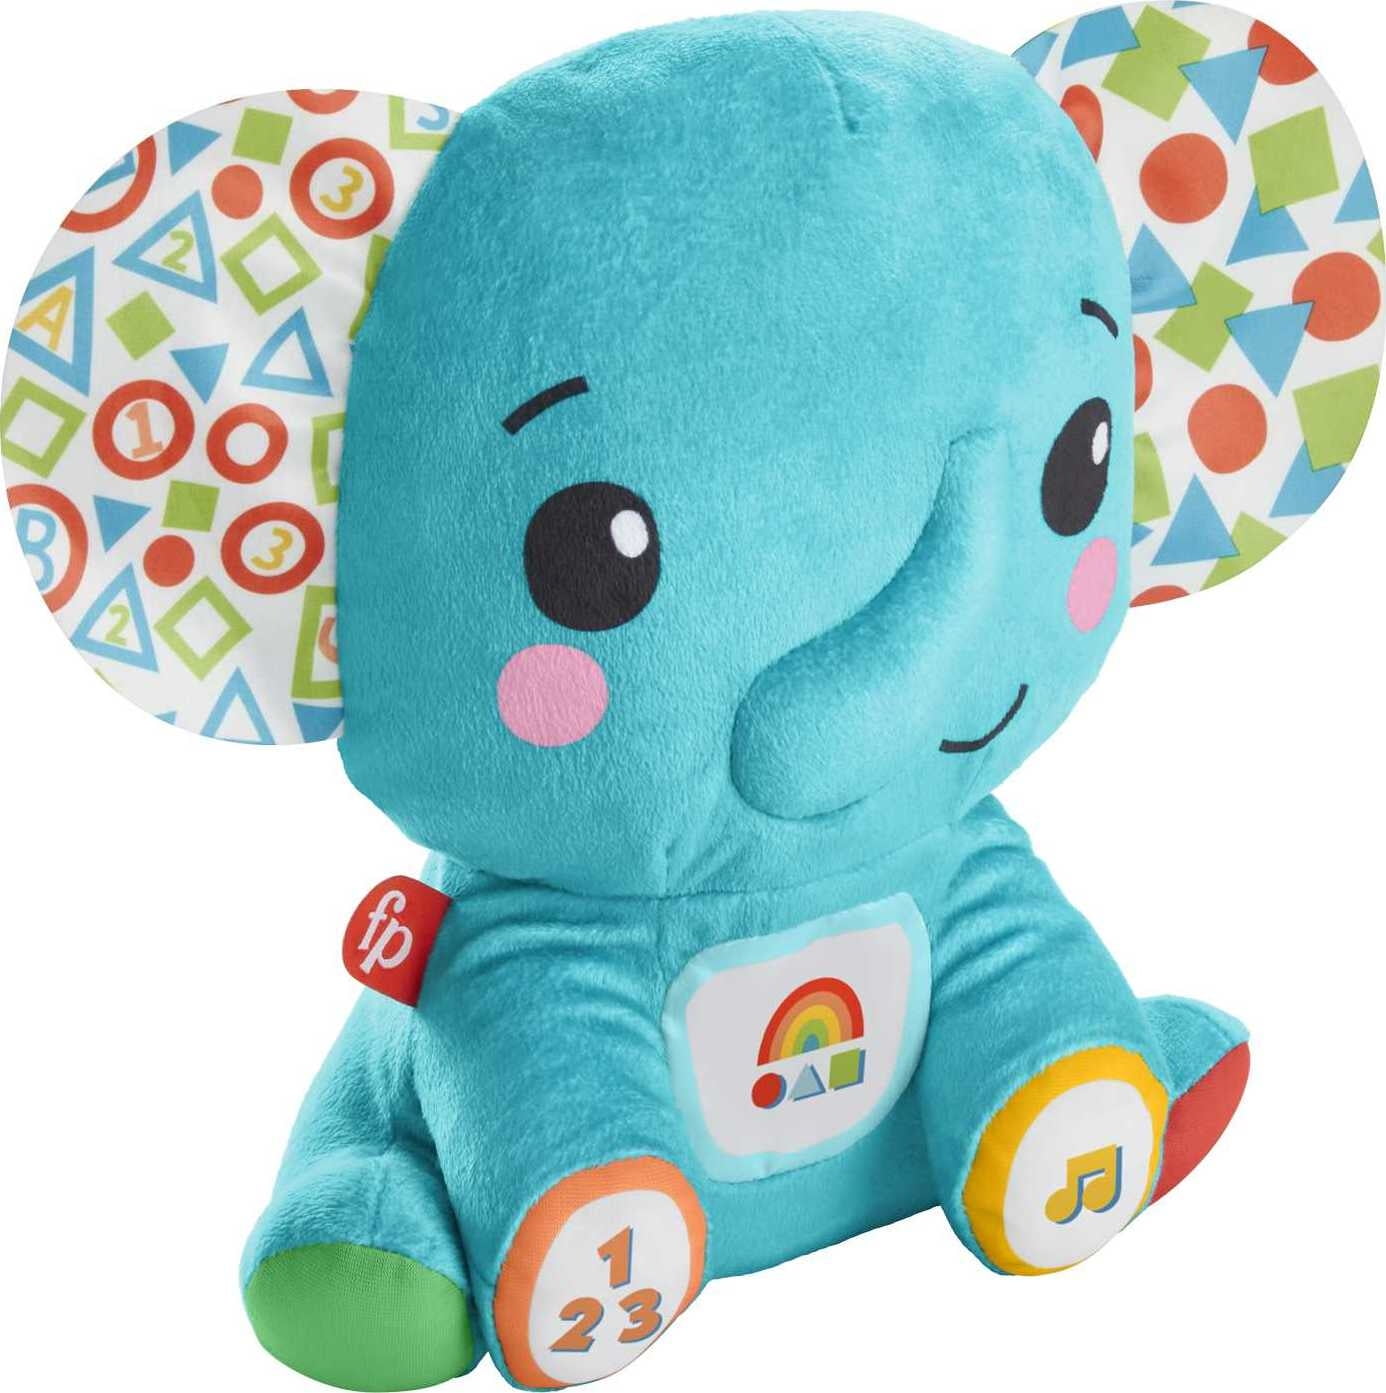 Fisher-Price 3-In-1 Musical Mobile Music Crib Elephant Infant Baby Toy